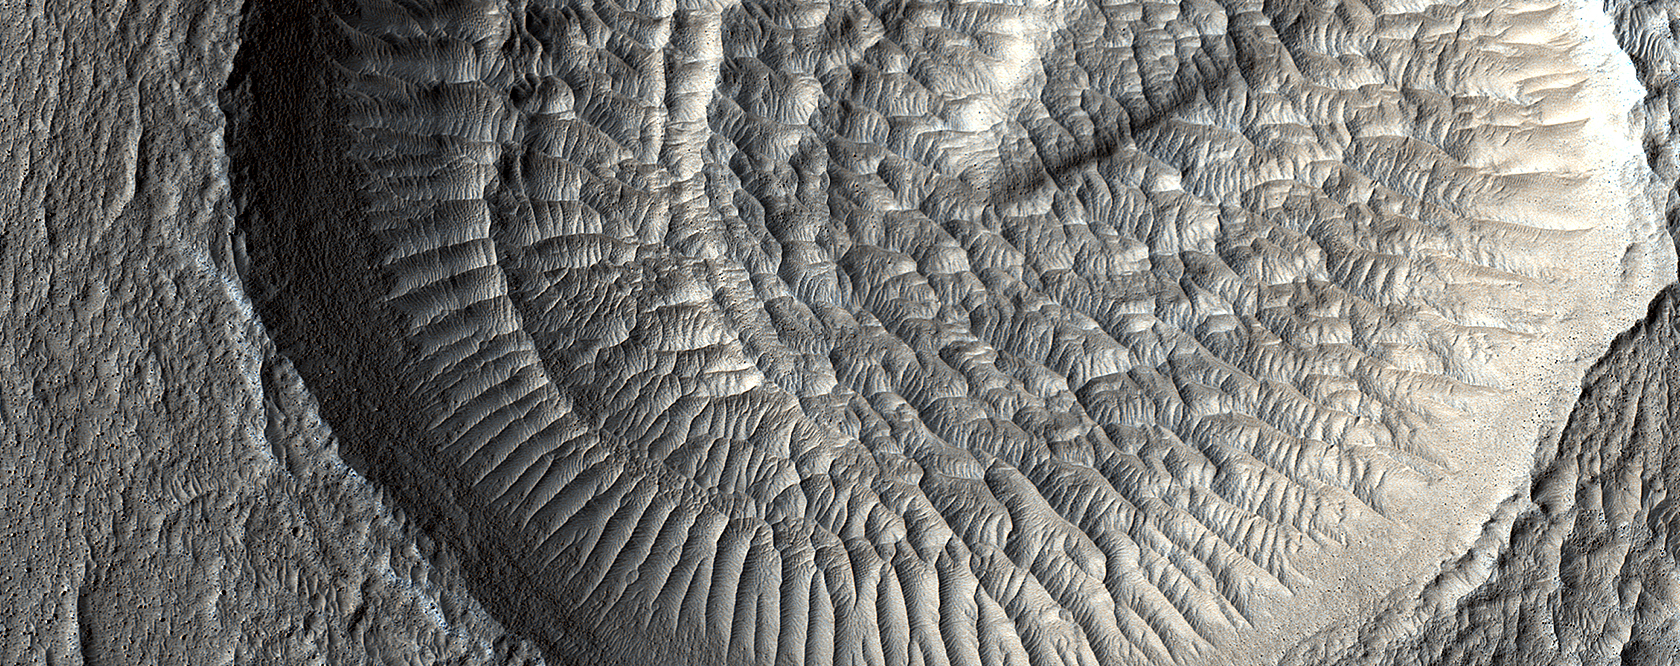 Layered Deposits and Wind Ripples